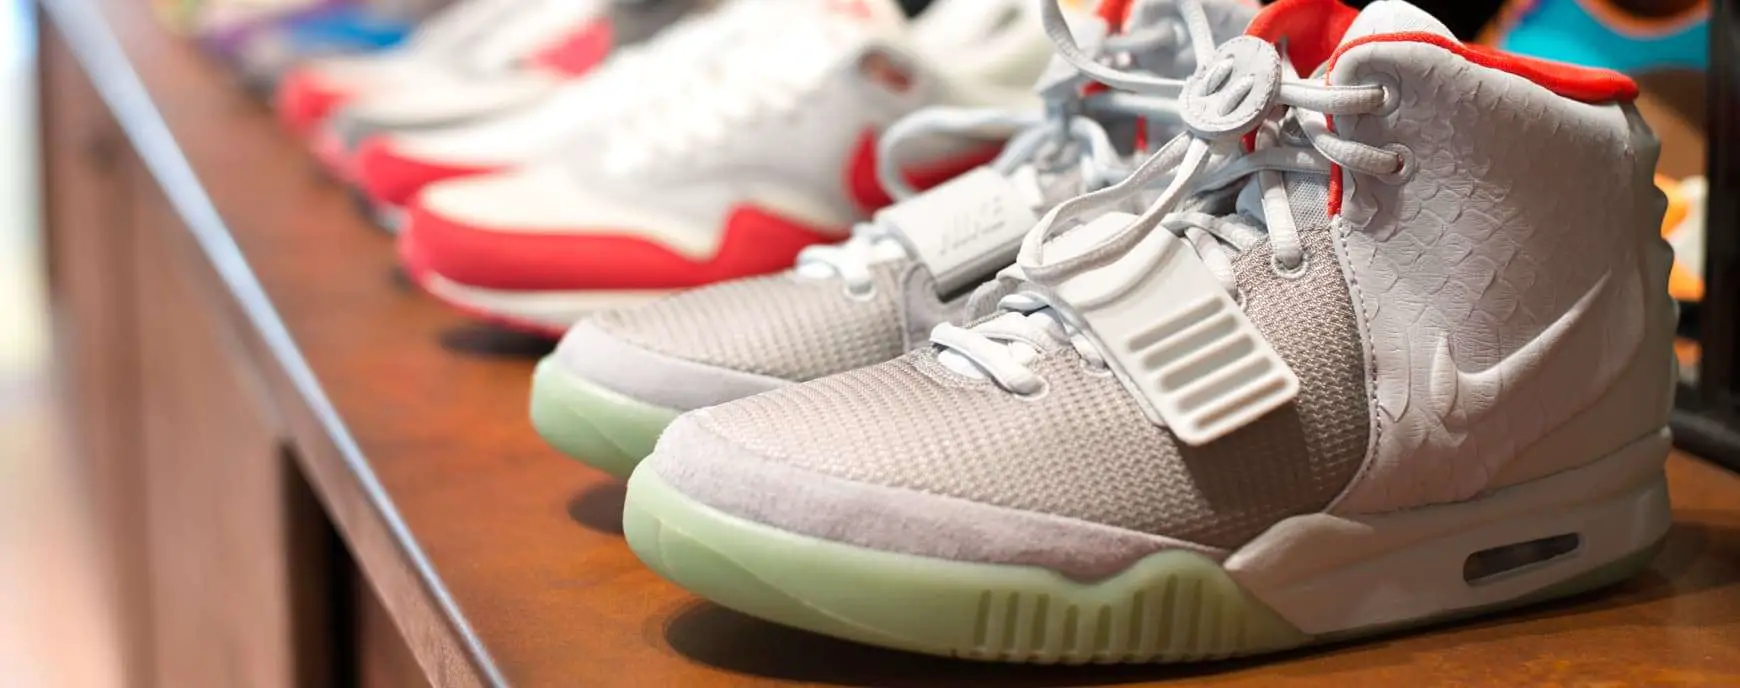 Can You Get Rich Reselling Sneakers?